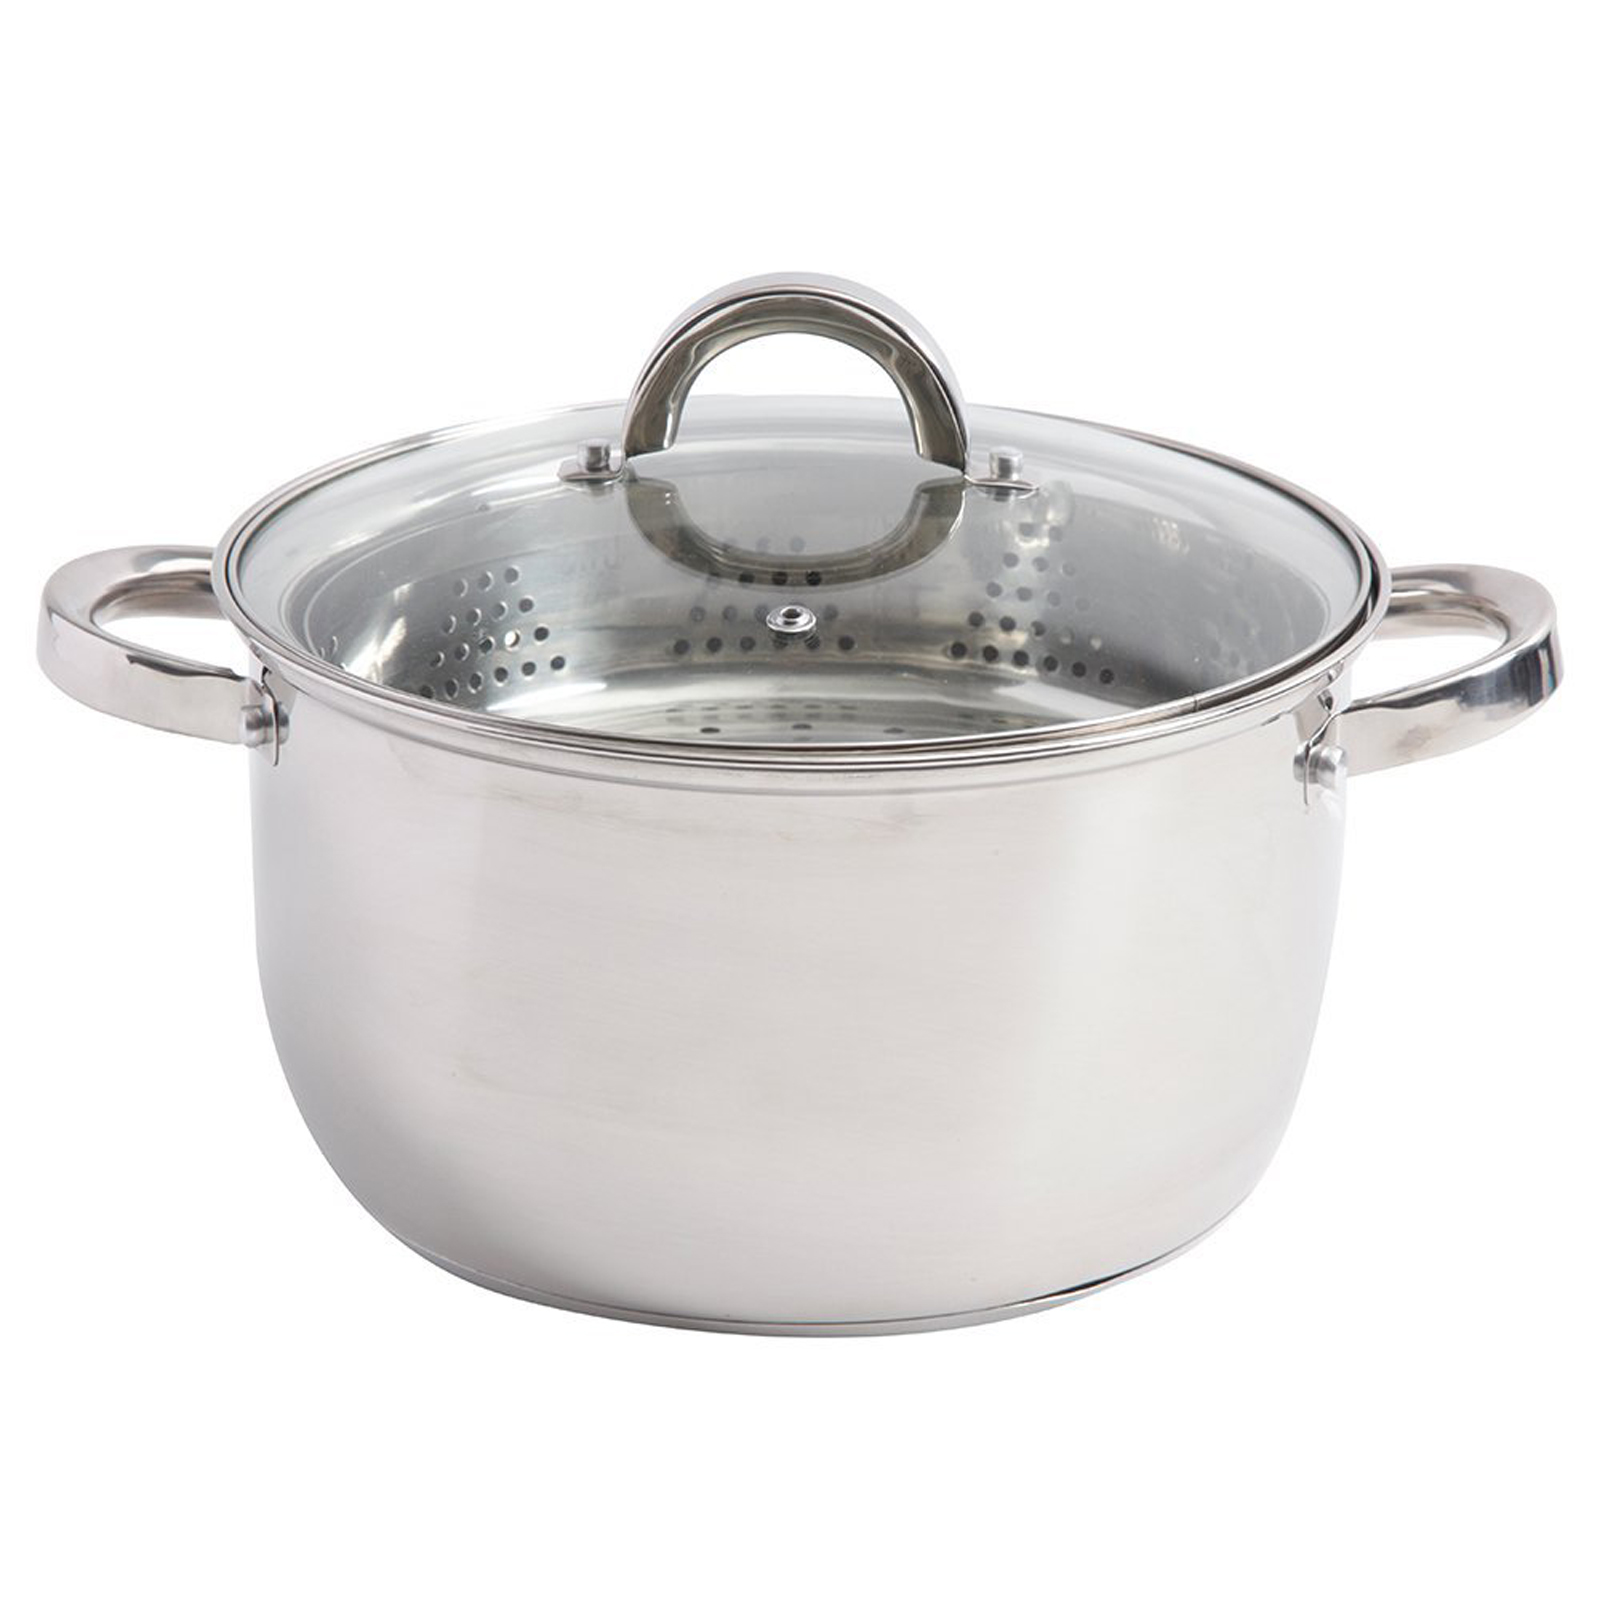 Oster Sangerfield 6 Qt Casserole with Steamer Insert and Lid